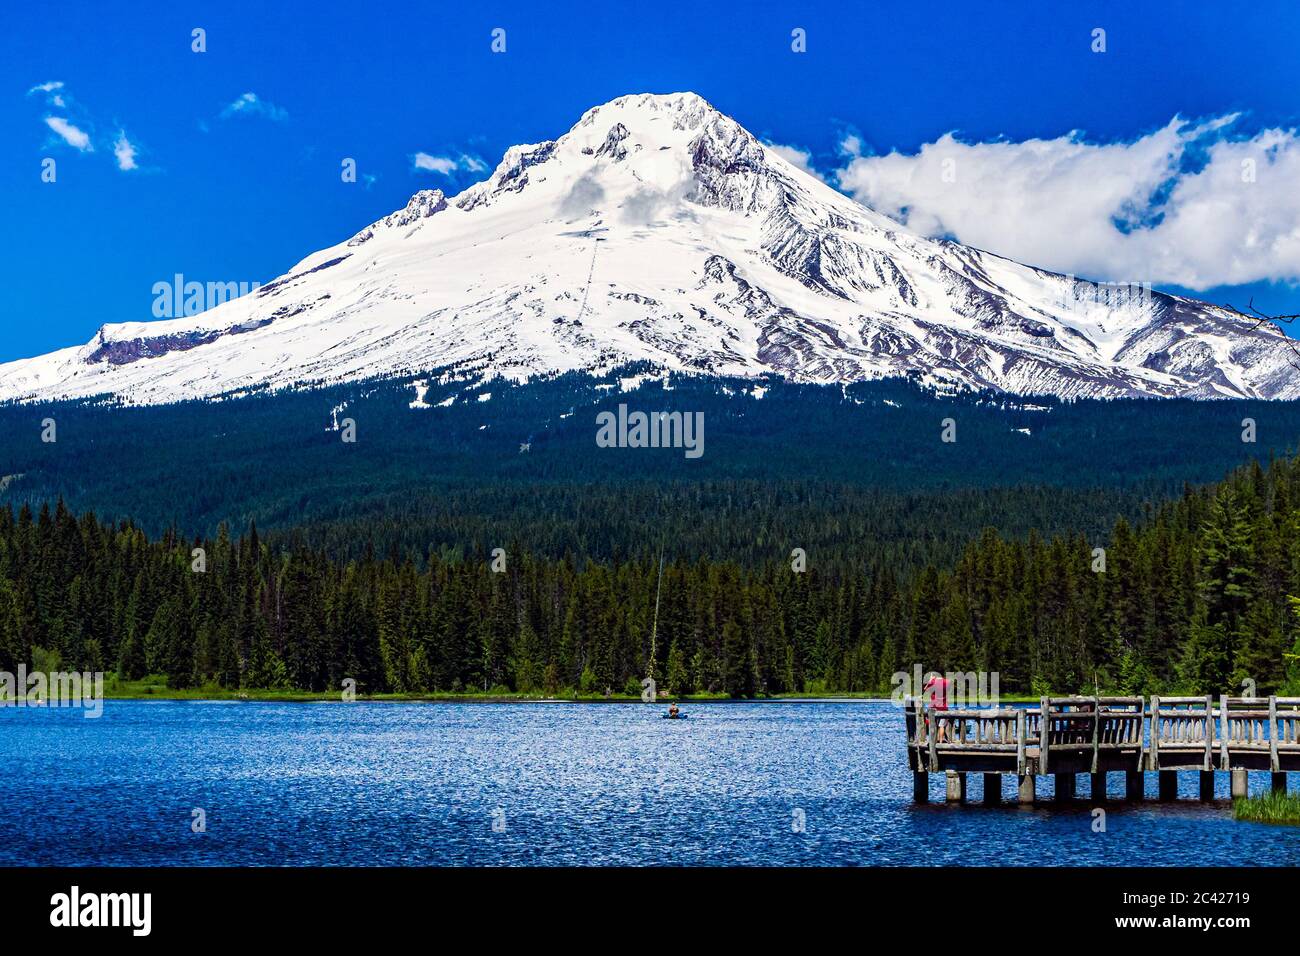 Snowy Mount Hood southern slope view from Trillium Lake, Government Camp, Mt Hood National Forest, Oregon. Stock Photo